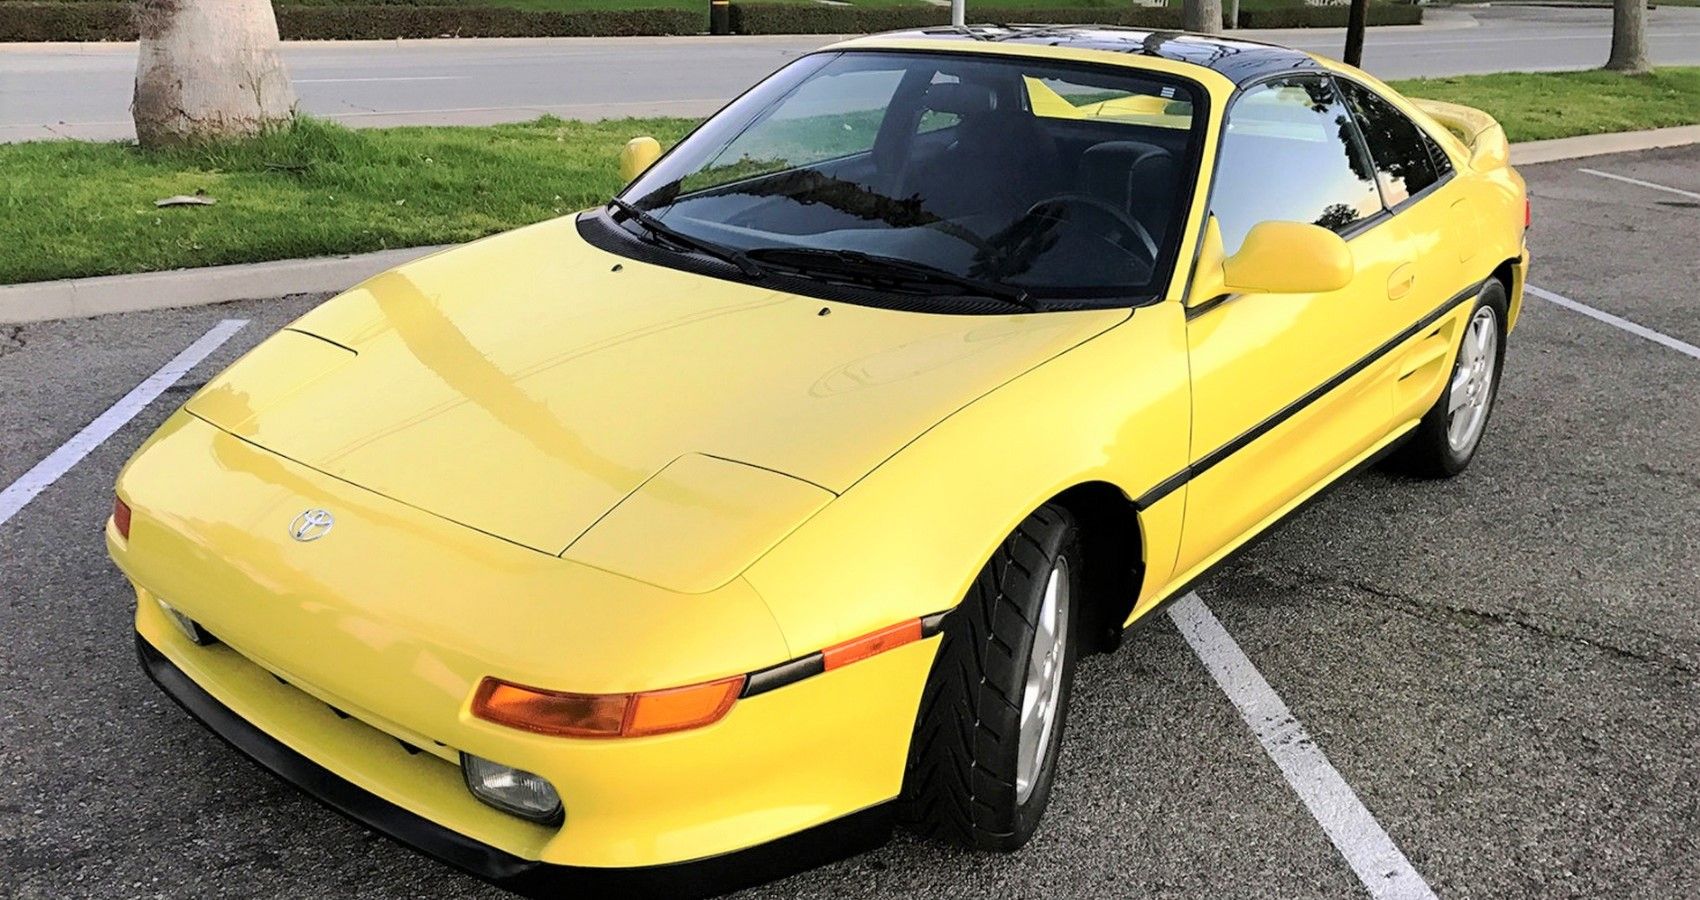 10 Most Reliable Classic JDM Sports Cars You Can Buy For $10,000